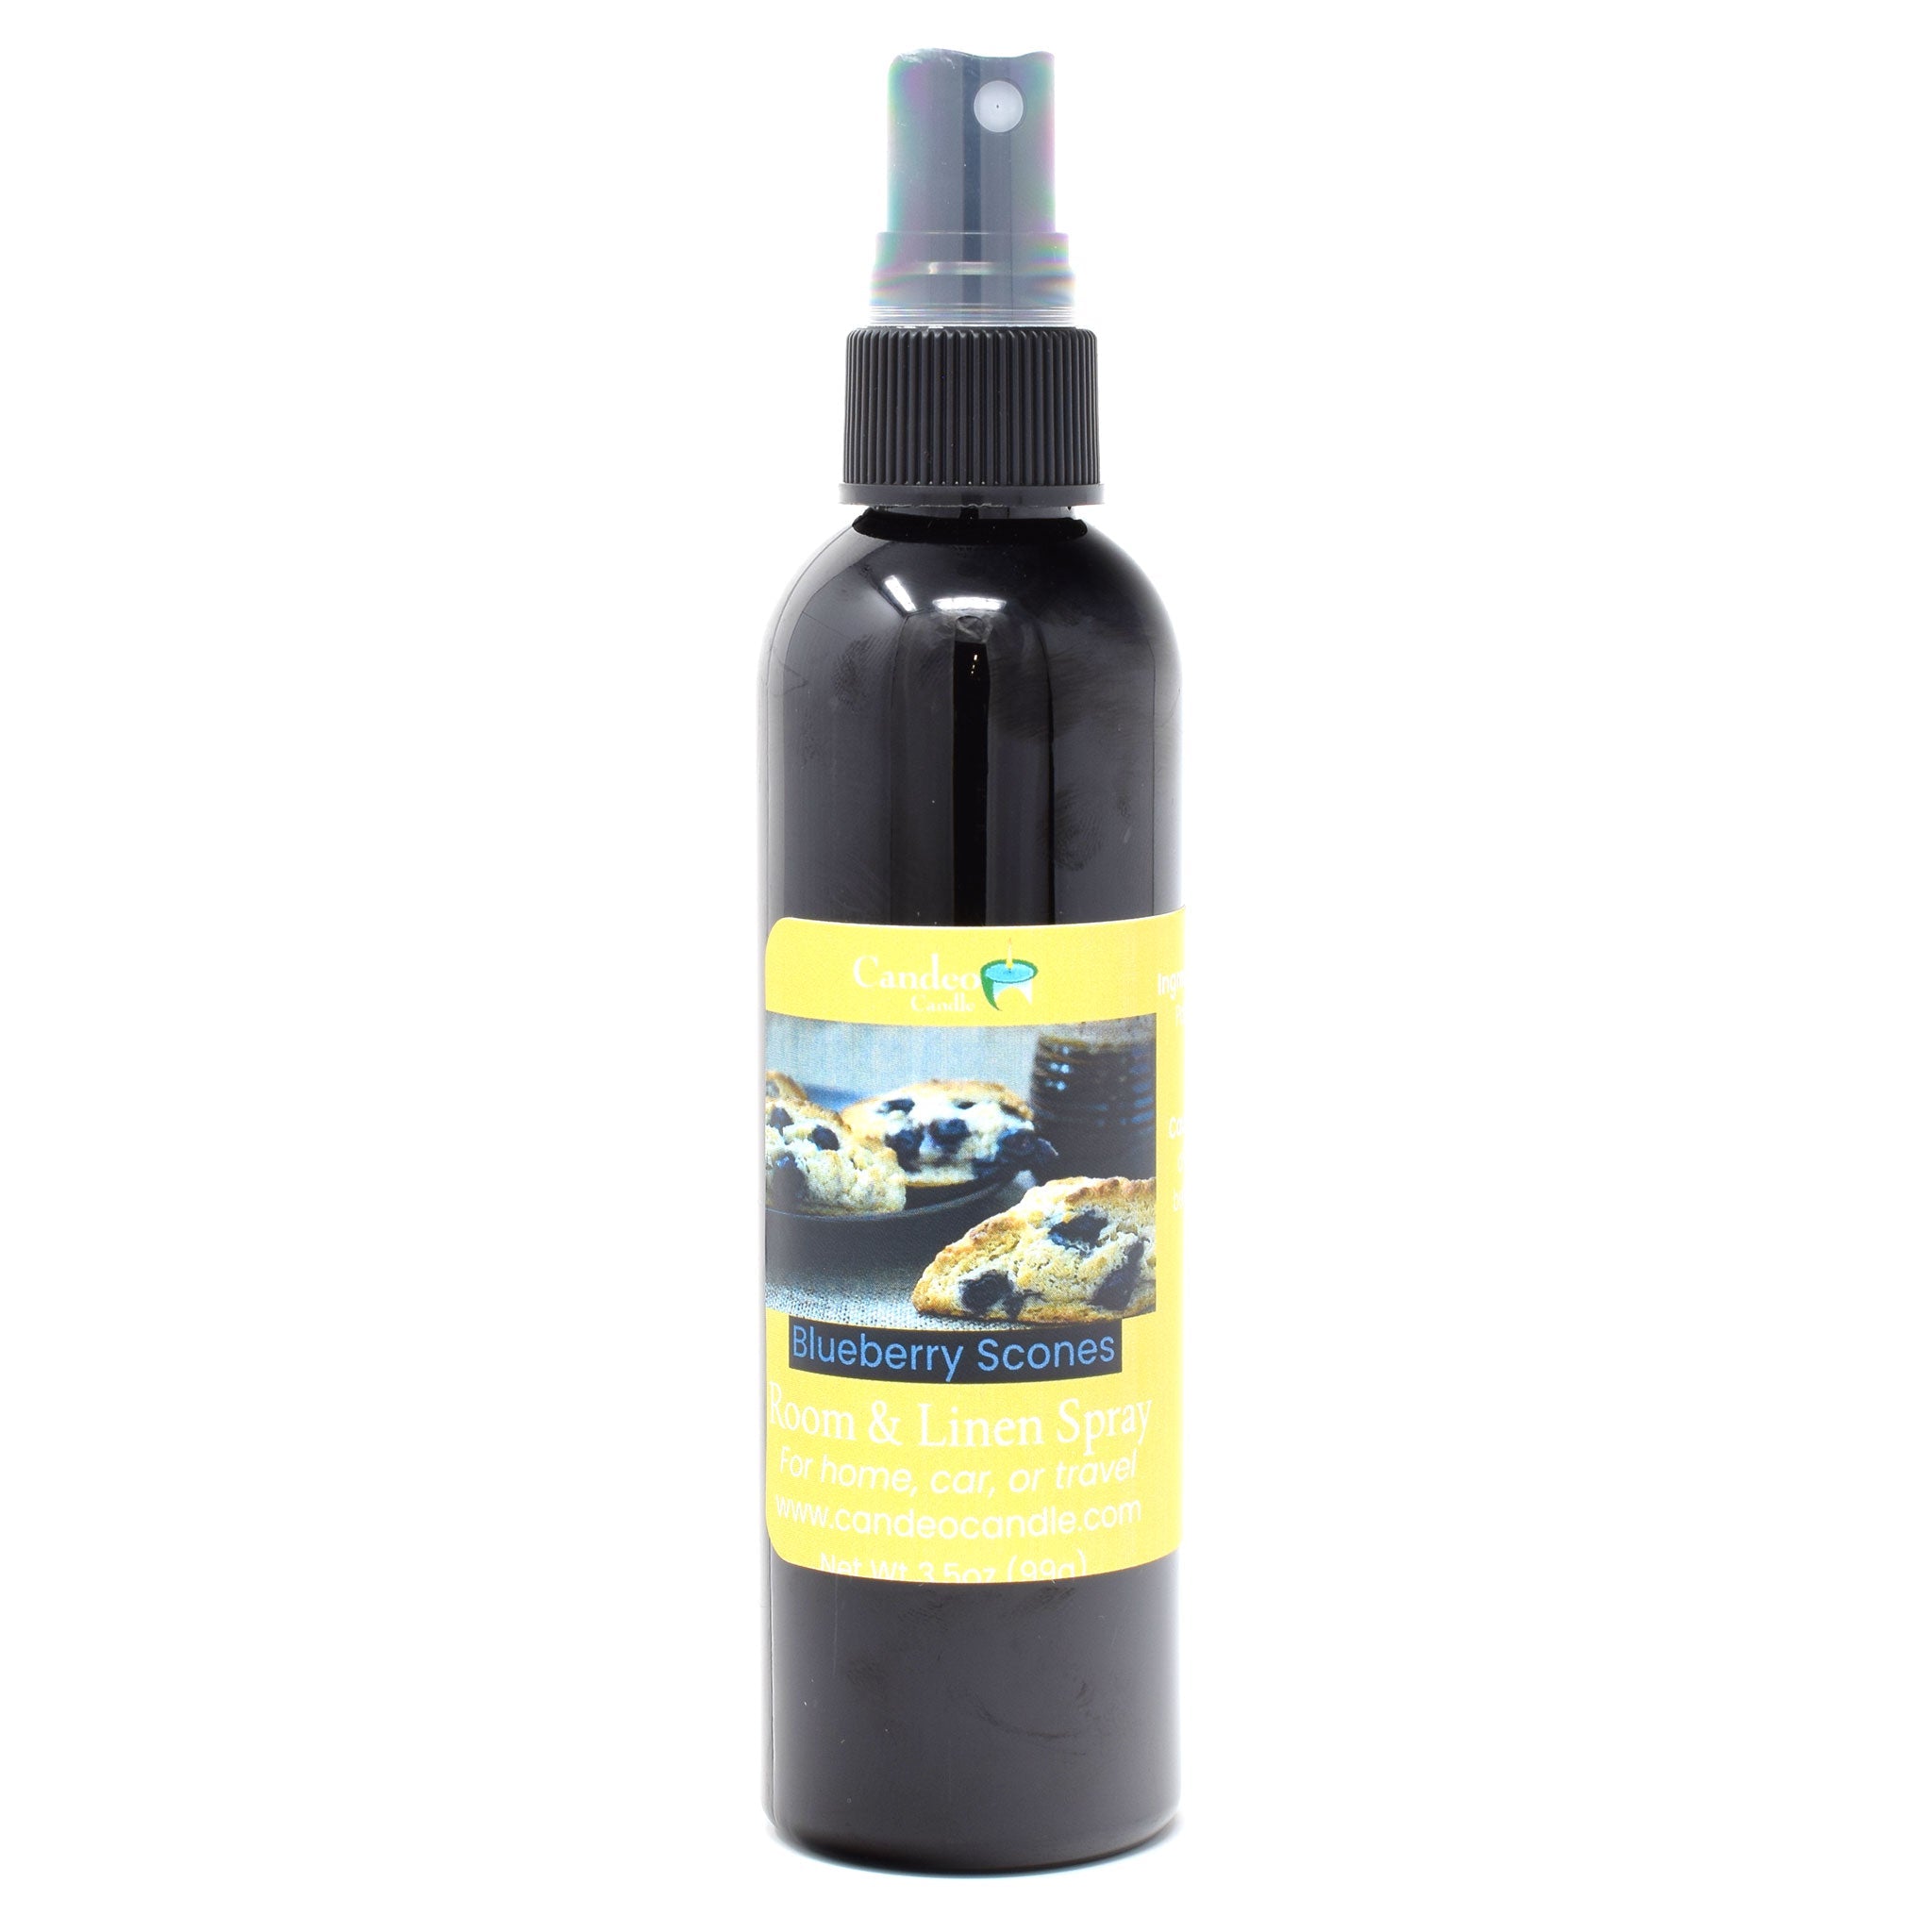 Blueberry Scones, 3.5 oz Room Spray - Candeo Candle